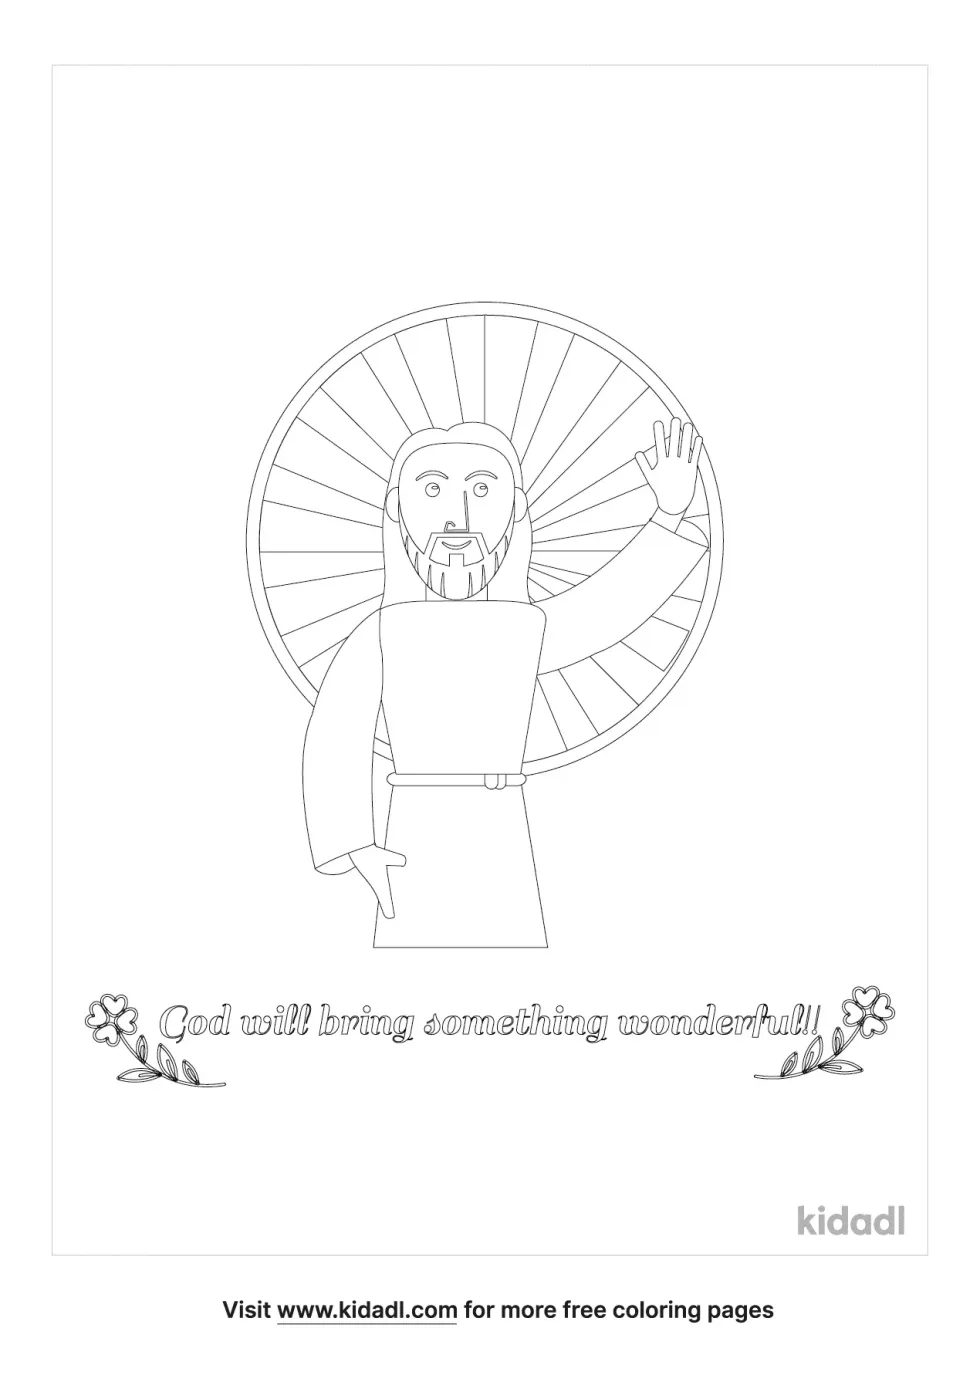 God Will Bring Something Wonderful Coloring Page